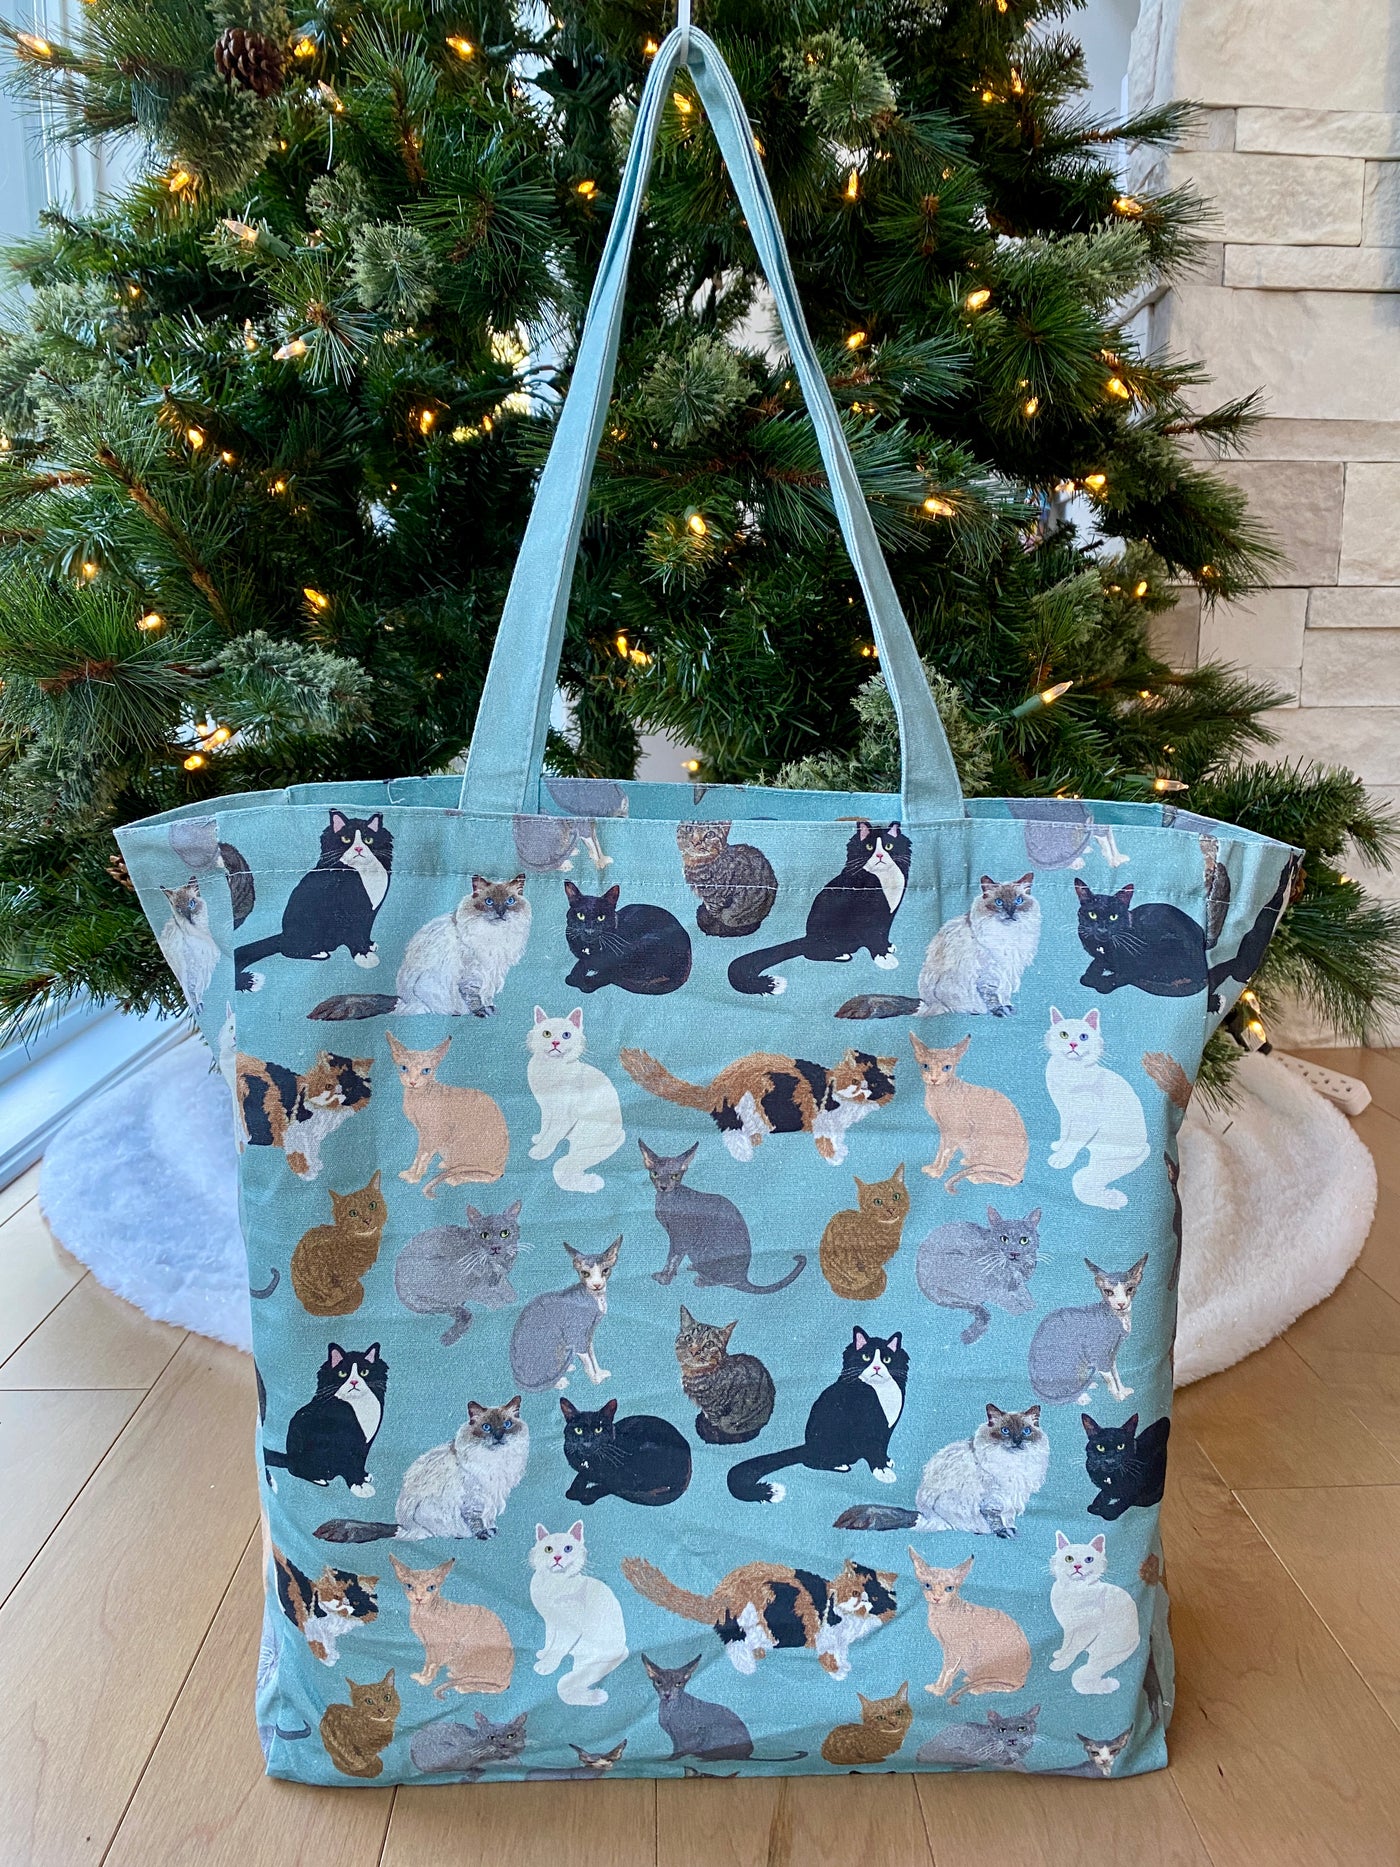 Illustrated Tote Bag: My cat friends